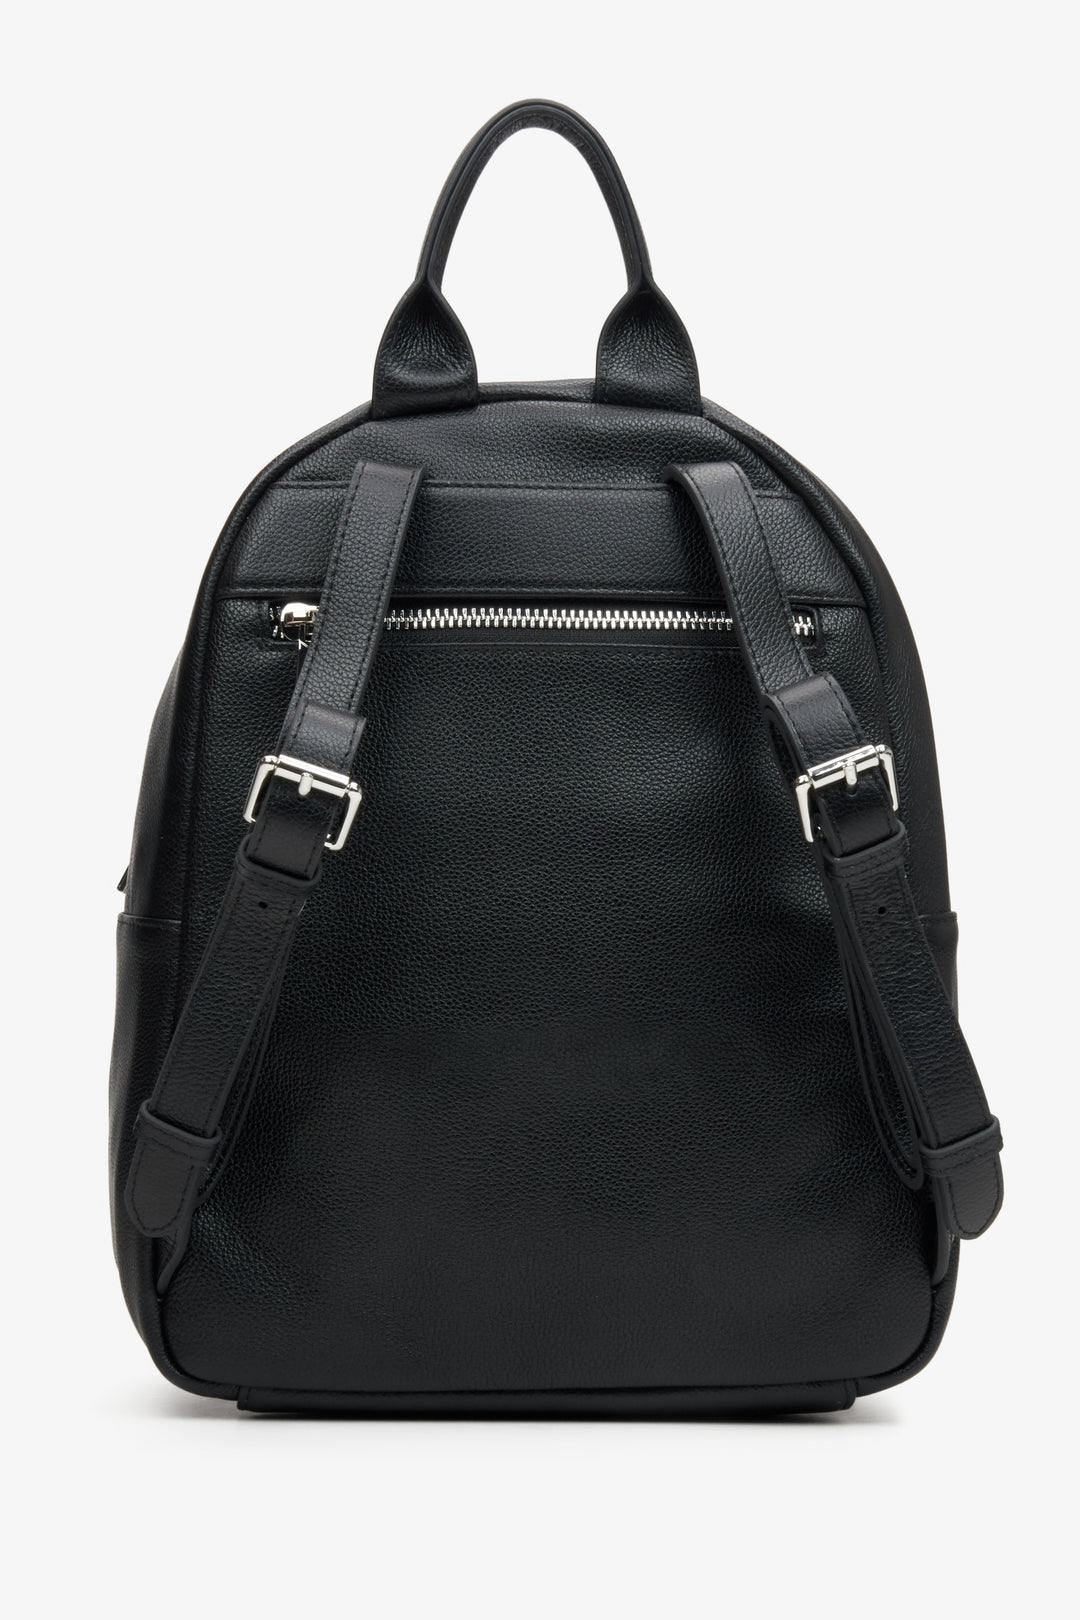 Women's black leather backpack with long straps by Estro - back view.